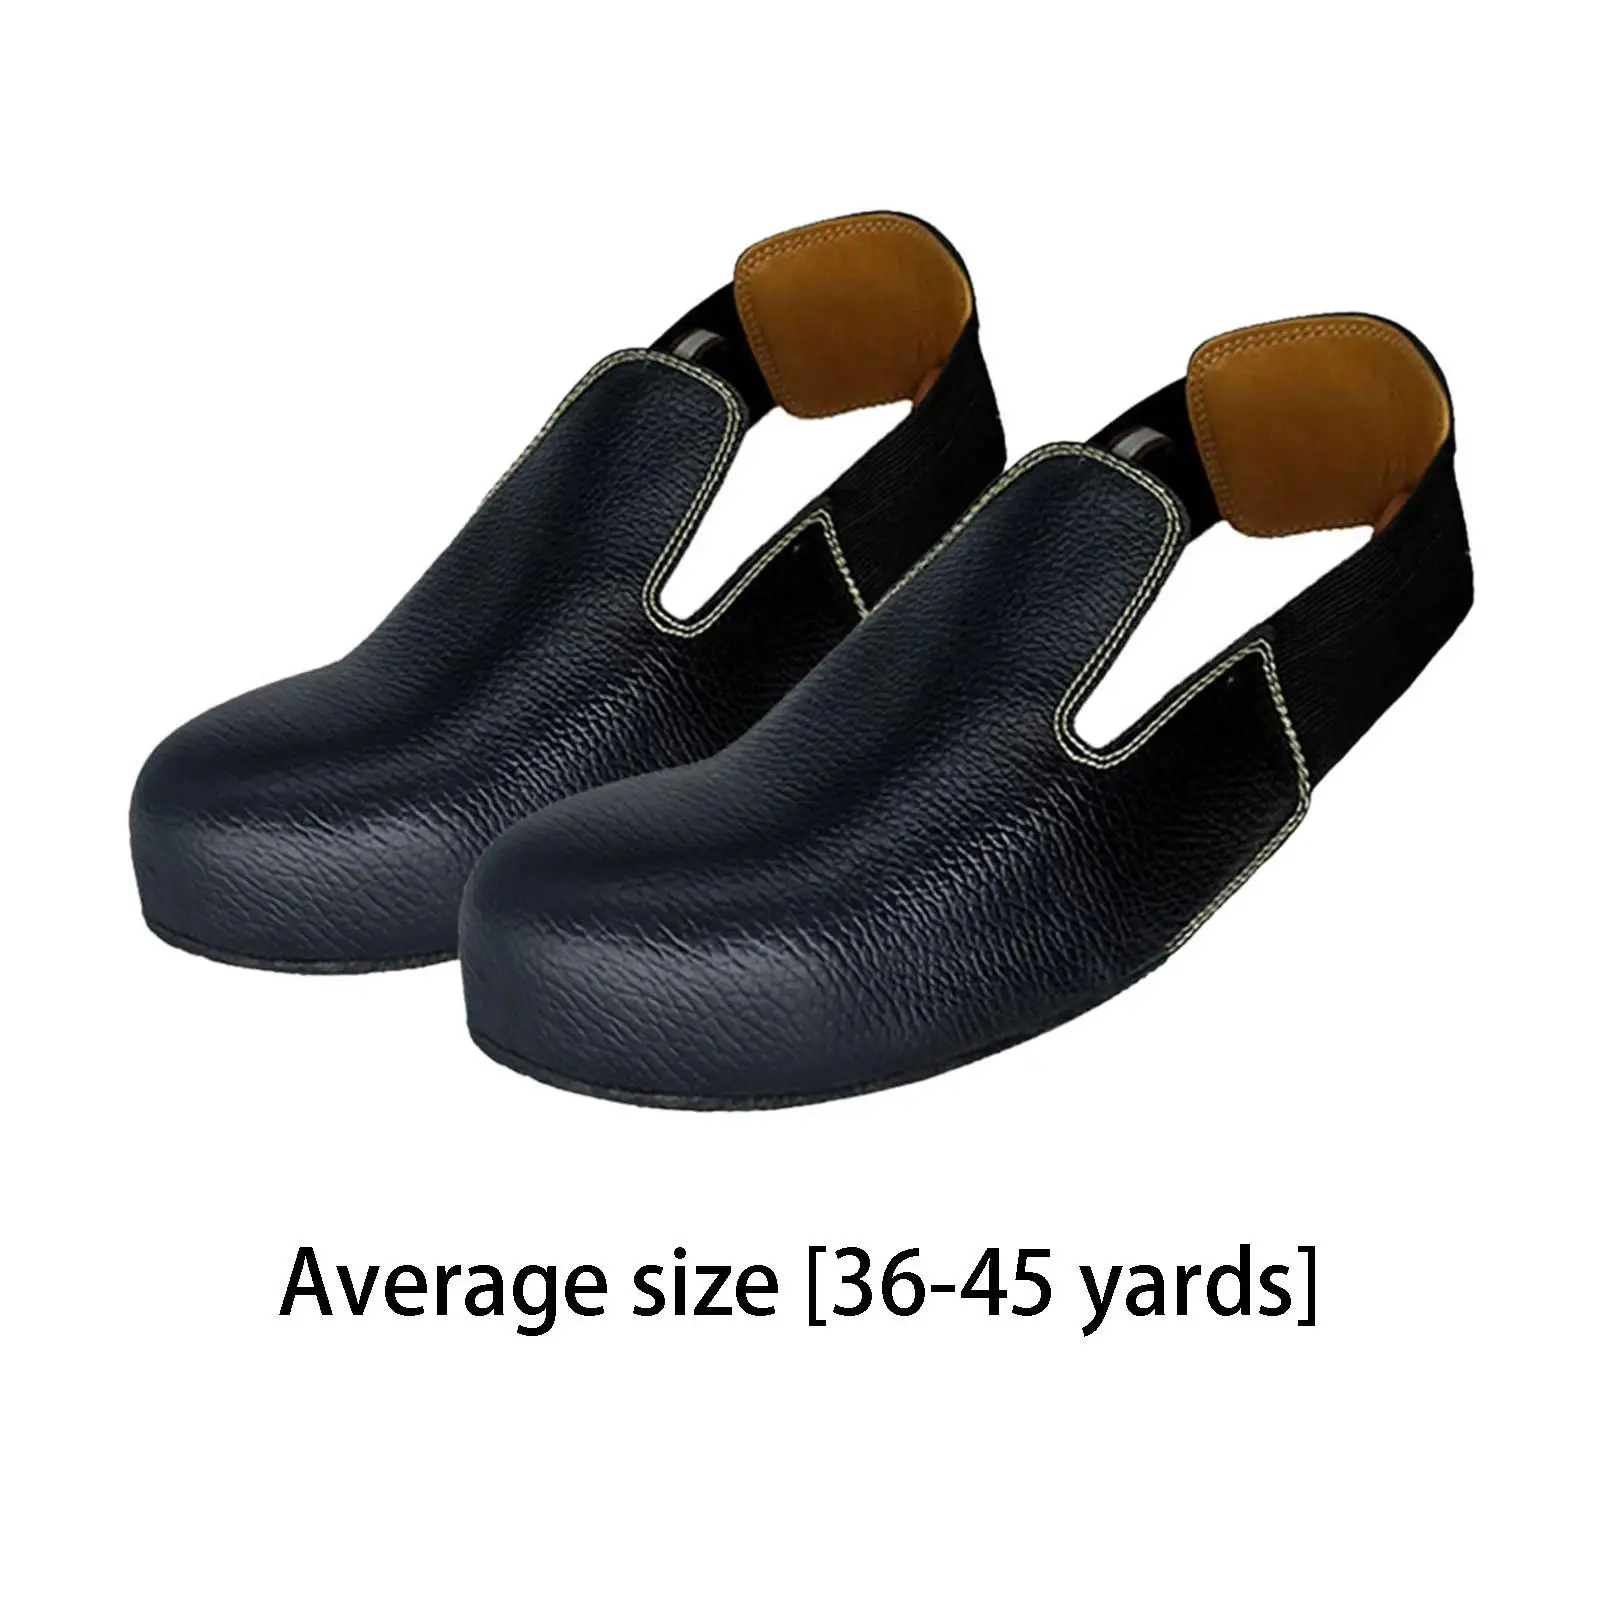 Toe Caps Safe Shoe Covers Leather Overshoes Cover Guards Anti Kick with Elastic Strap Toe Protector for Grinding Welding